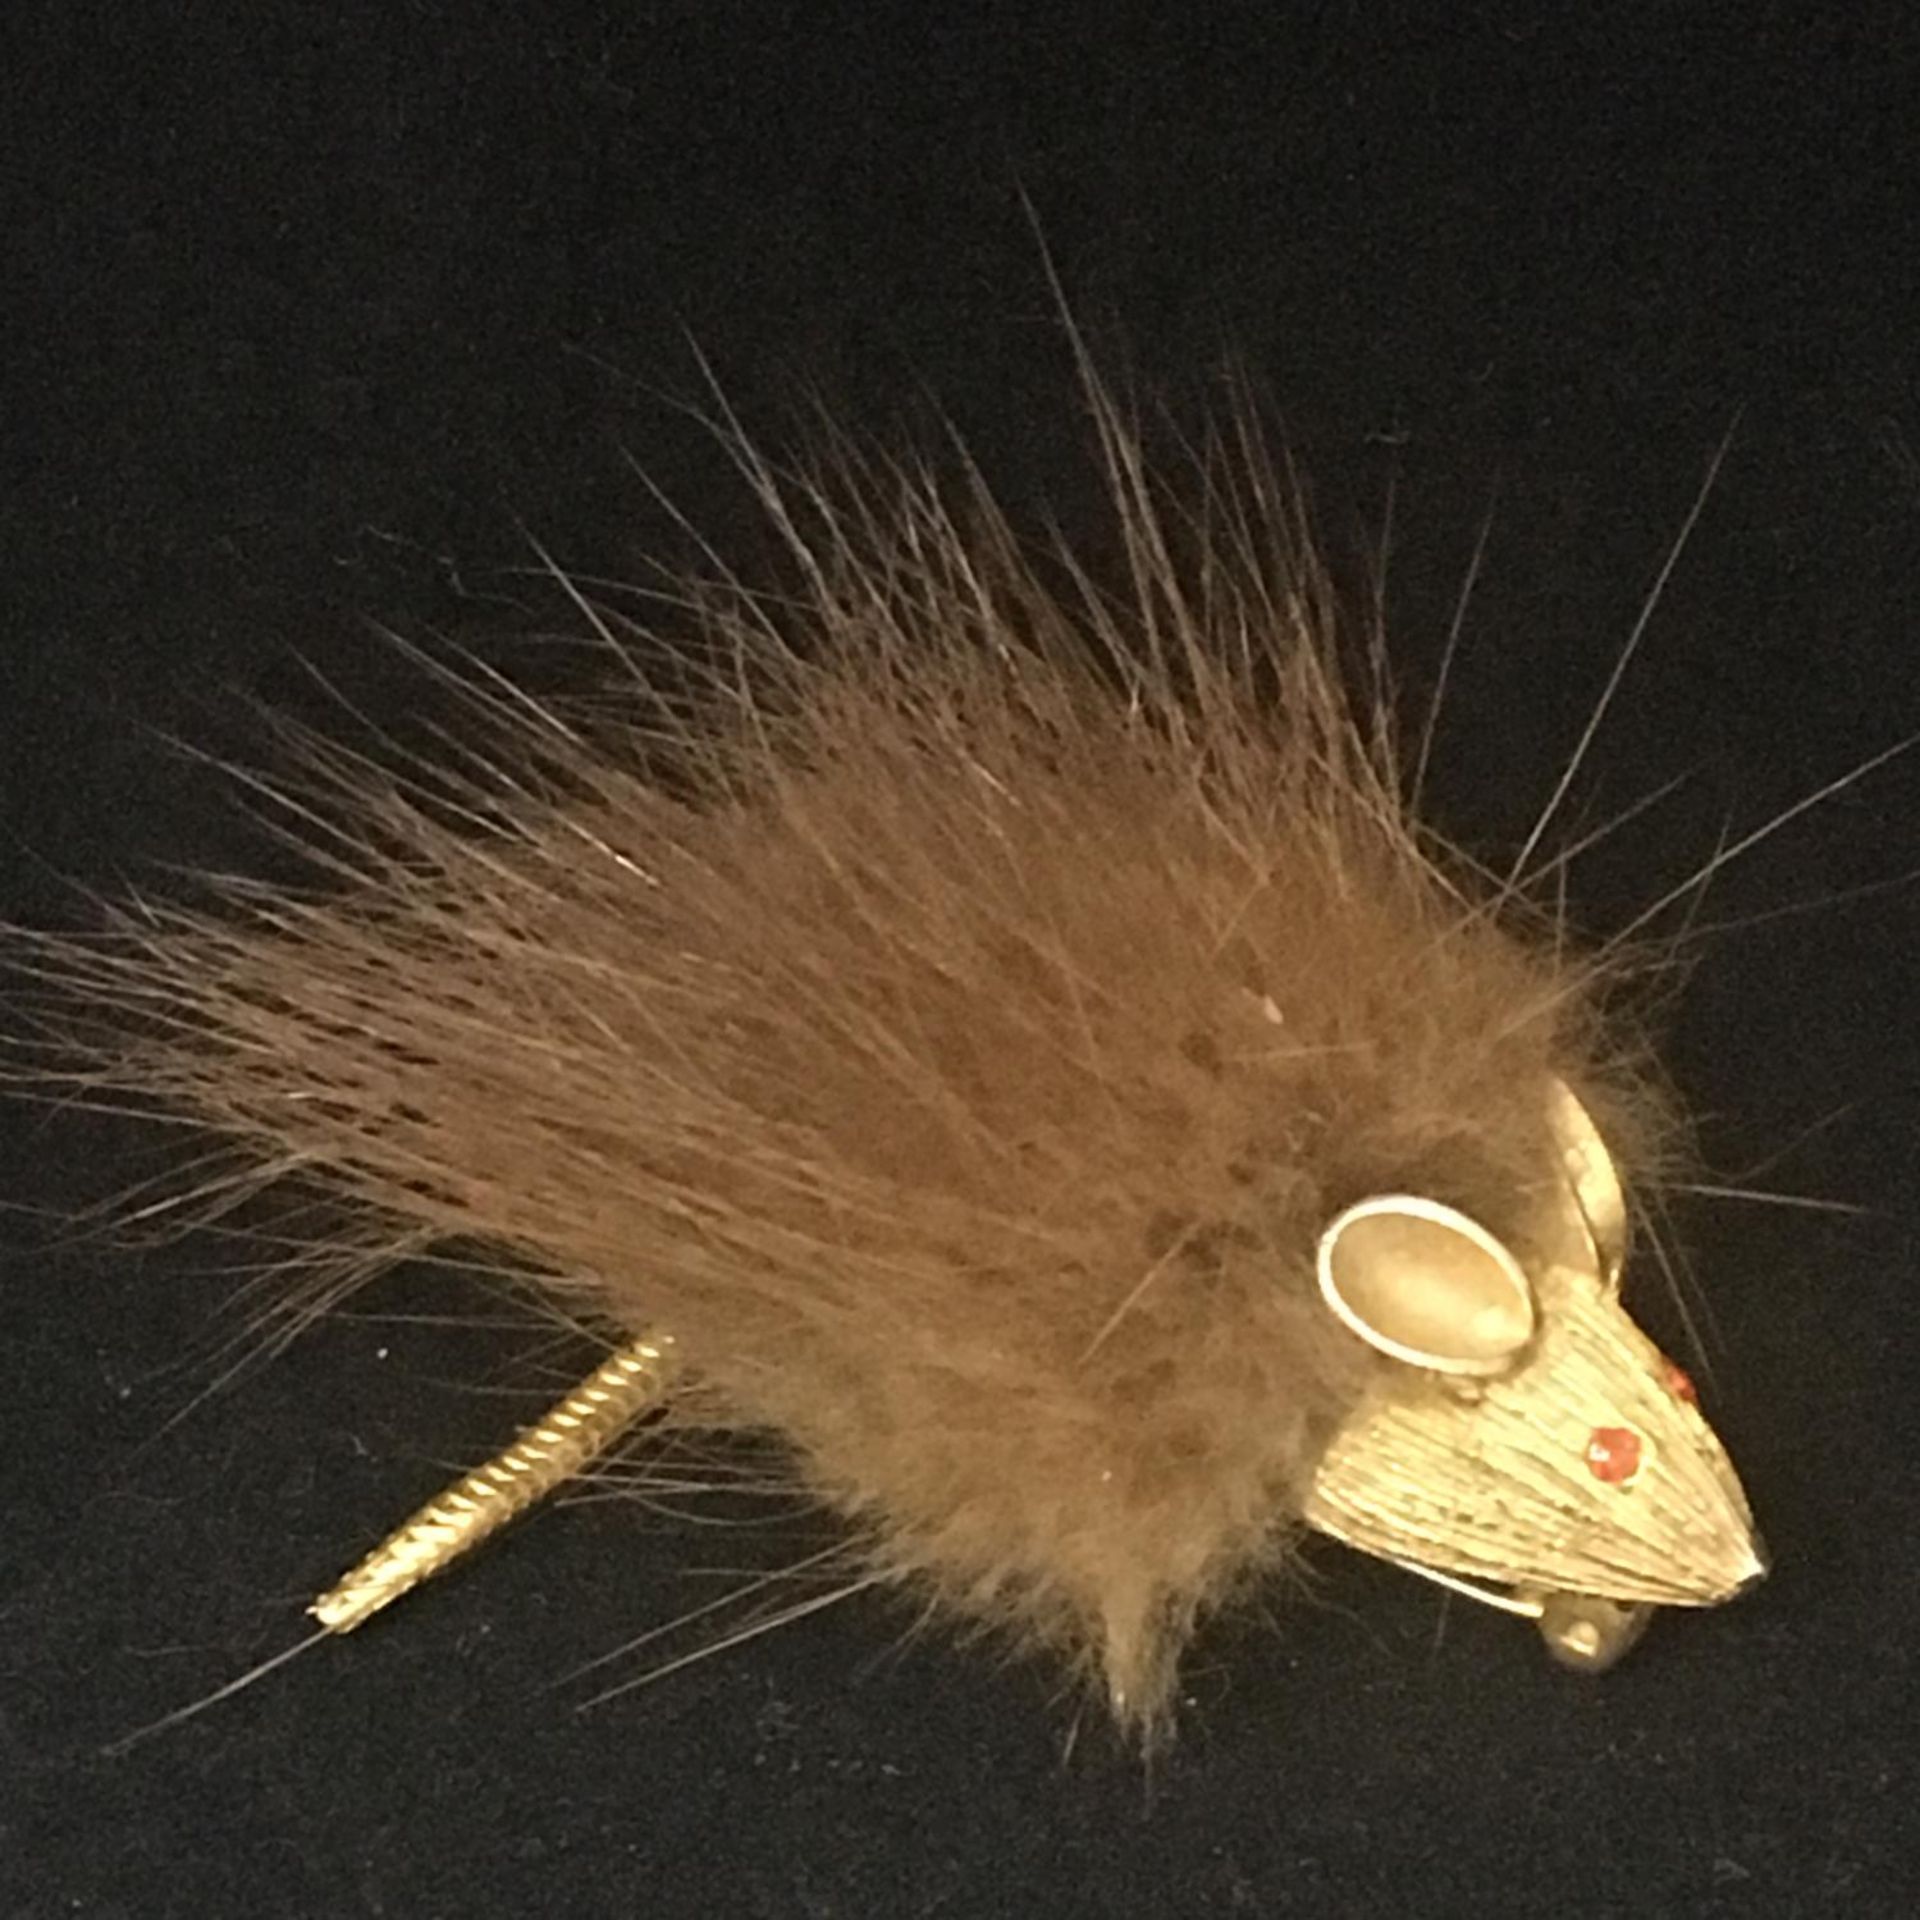 Mid 20th century unusual brooch in the form of a mouse. Having a mink fur body, articulated yellow